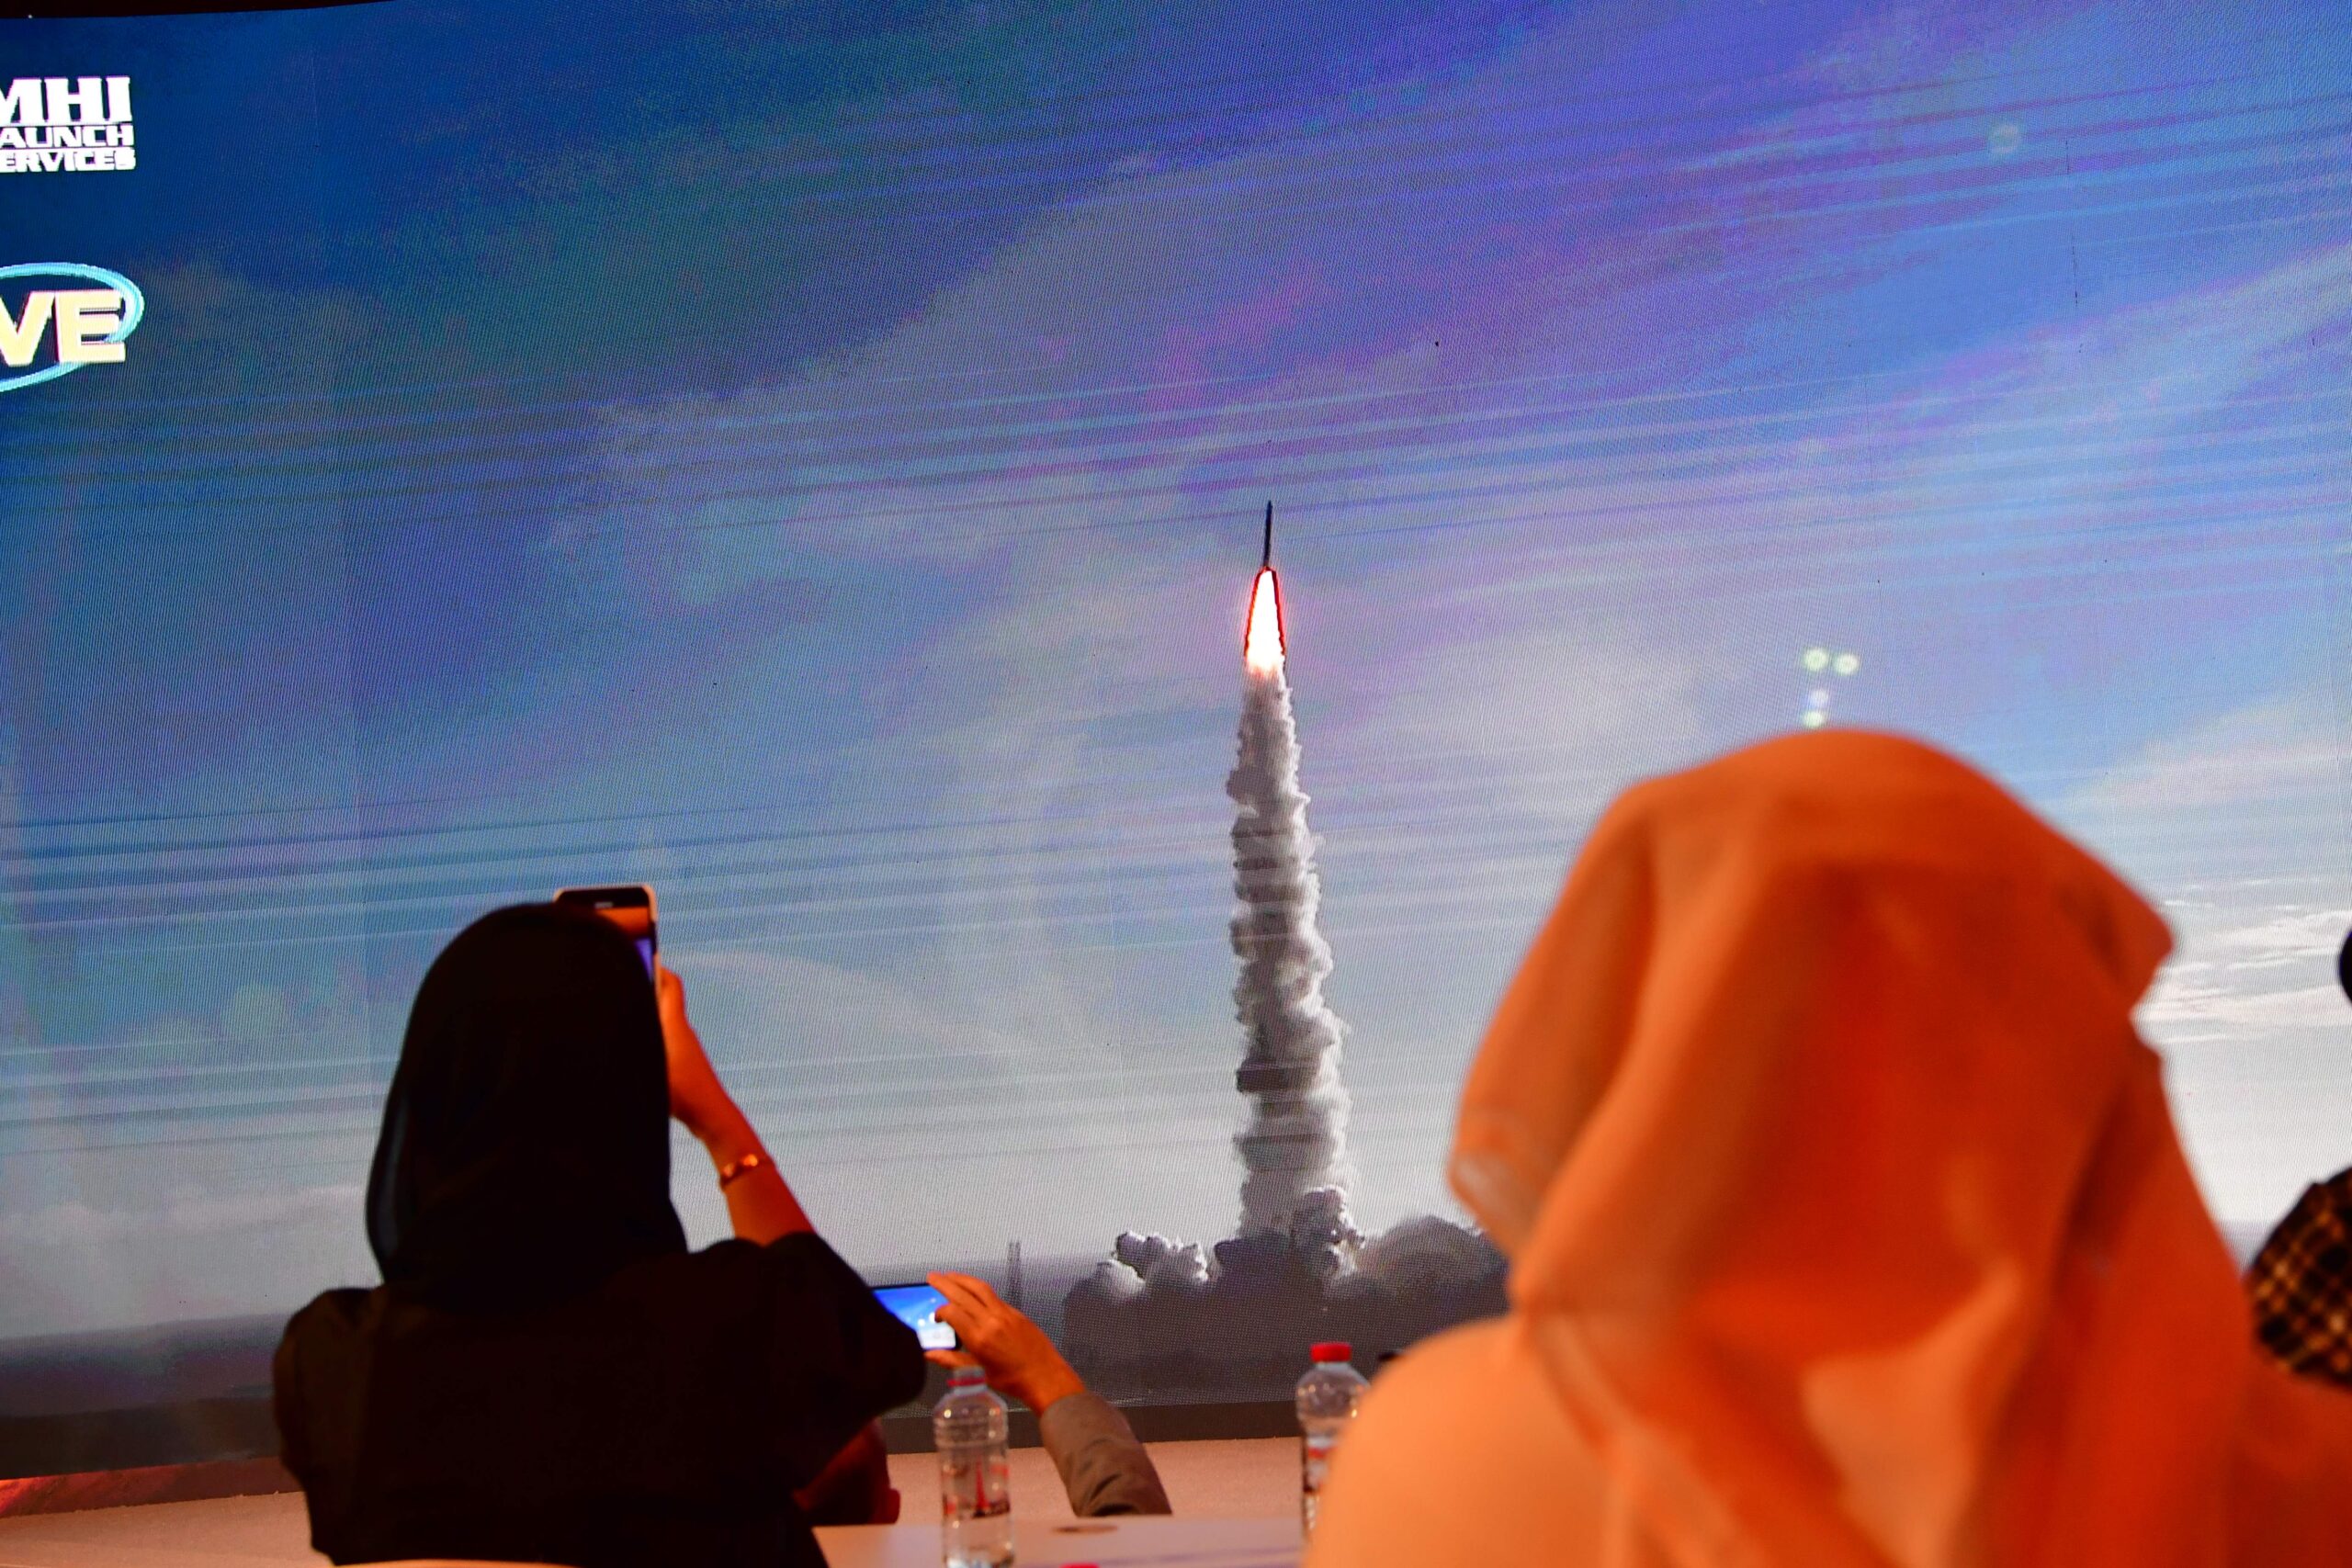 A picture taken on July 19, 2020, shows a screen broadcasting the launch of the "Hope" Mars probe at the Mohammed Bin Rashid Space Centre in Dubai. - The probe is one of three racing to the Red Planet, with Chinese and US rockets also taking advantage of the Earth and Mars being unusually close: a mere hop of 55 million kilometres (34 million miles). "Hope" -- Al-Amal in Arabic -- is expected to start orbiting Mars by February 2021, marking the 50th anniversary of the unification of the UAE. (Photo by Giuseppe CACACE / AFP) (Photo by GIUSEPPE CACACE/AFP via Getty Images)